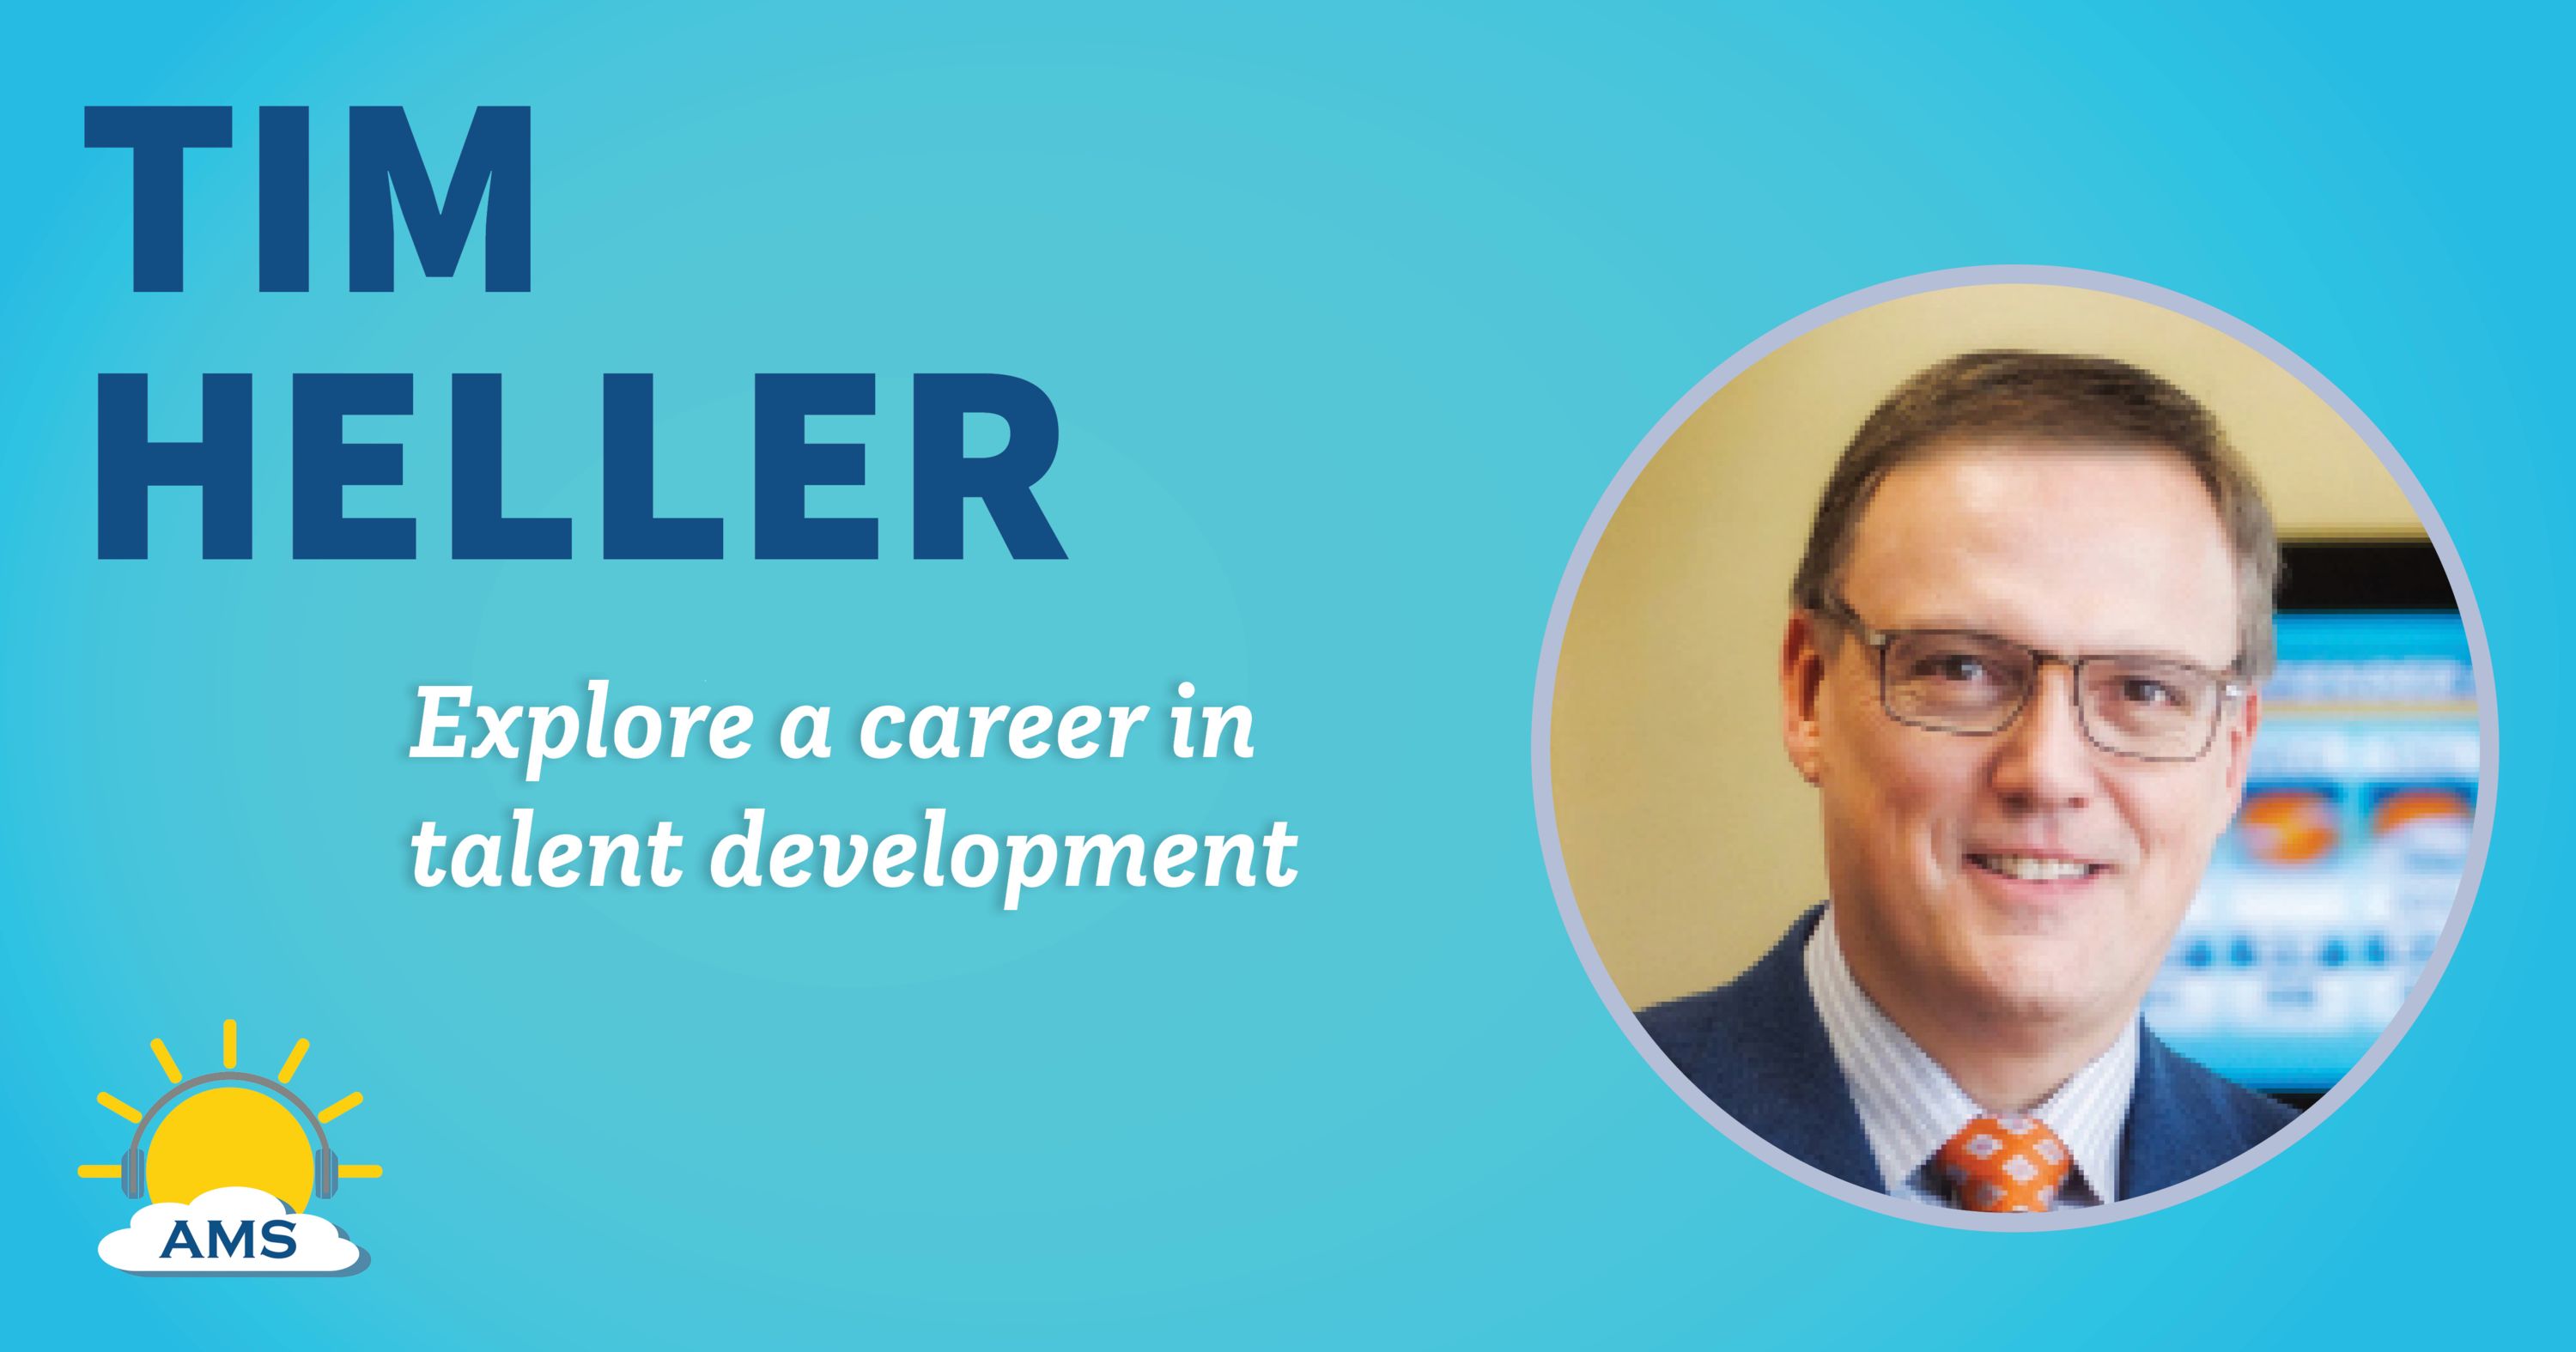 tim heller headshot graphic with teaser text that reads &quotexplore a career in talent development"